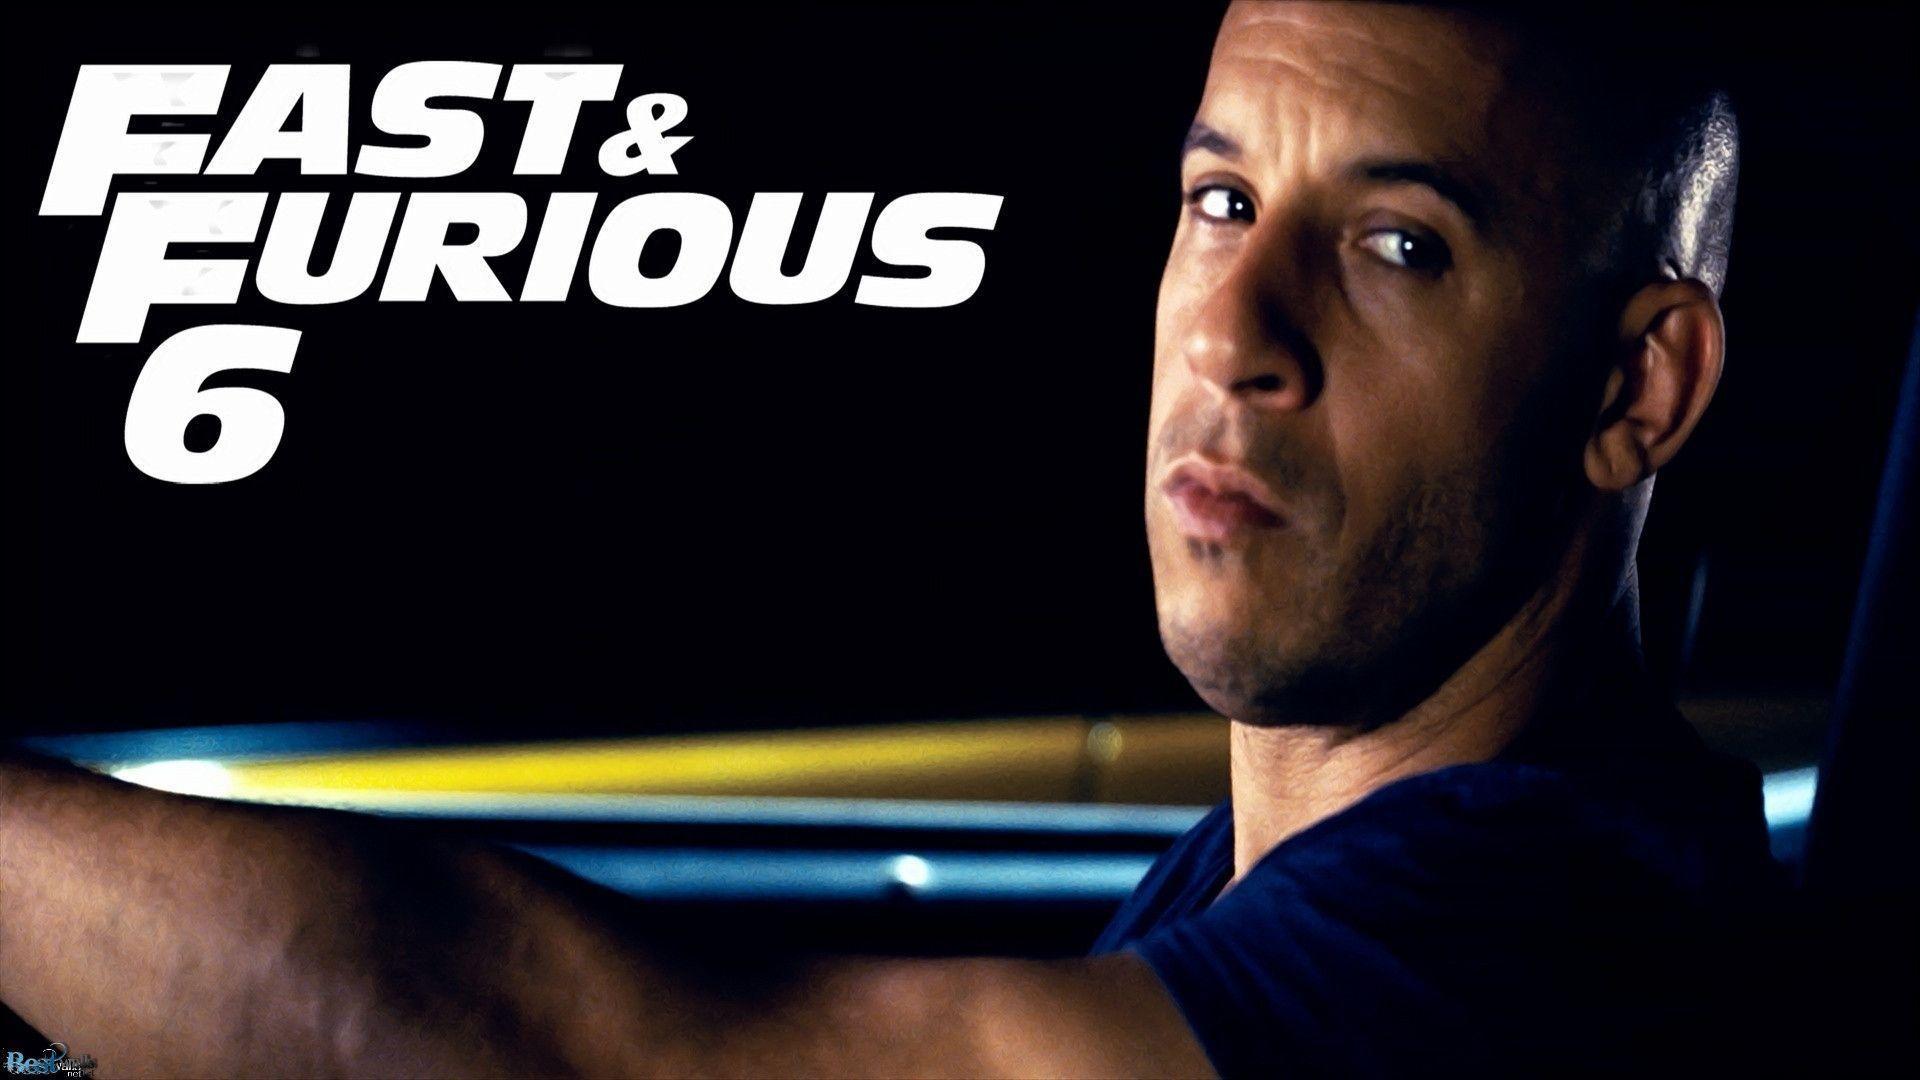 Vin Diesel in Fast and Furious 6 HD Wallpaper 1920x1080